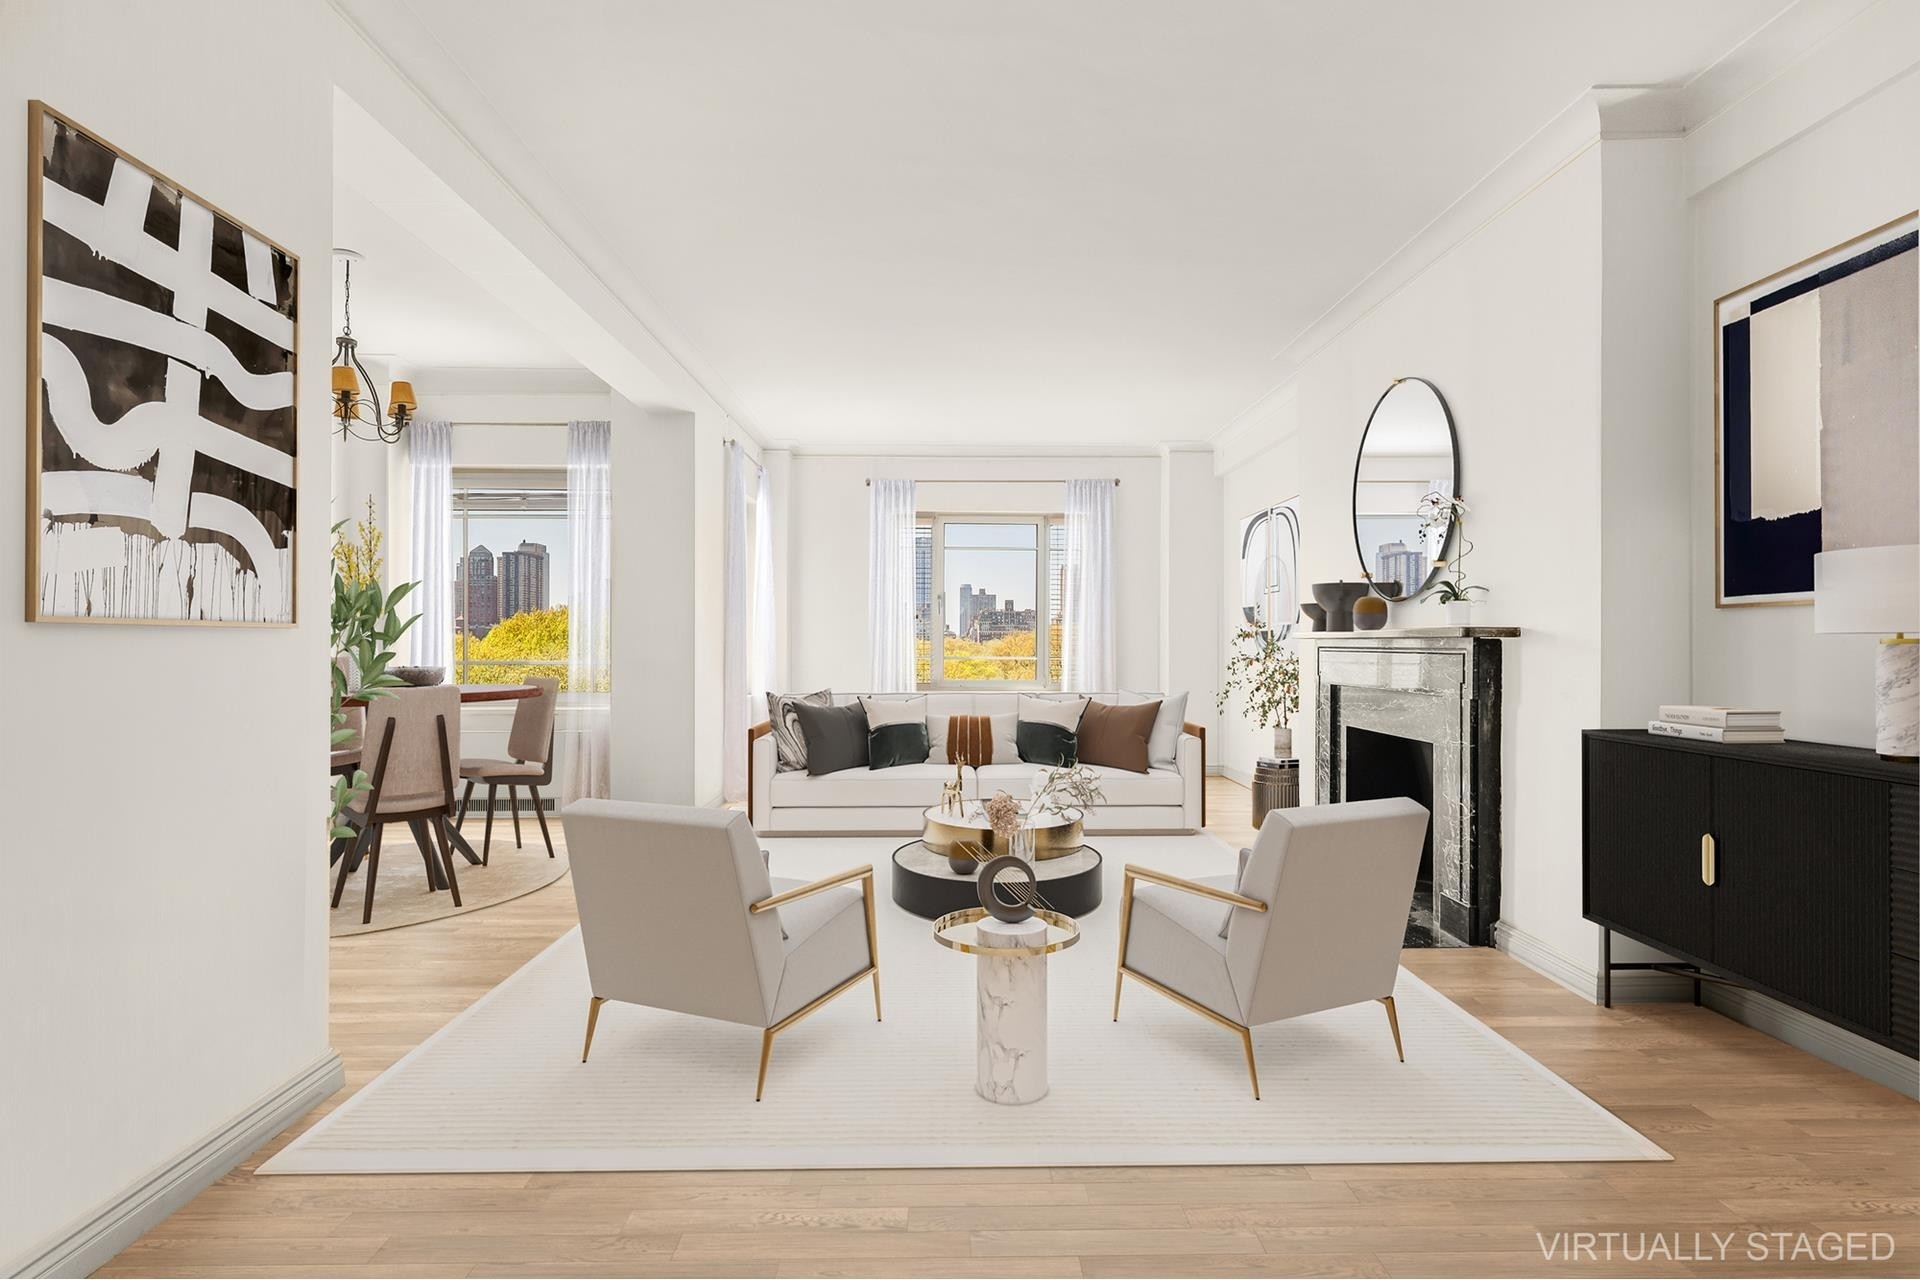 Co-op Properties for Sale at 880 FIFTH AVE, 11C Lenox Hill, New York, New York 10021